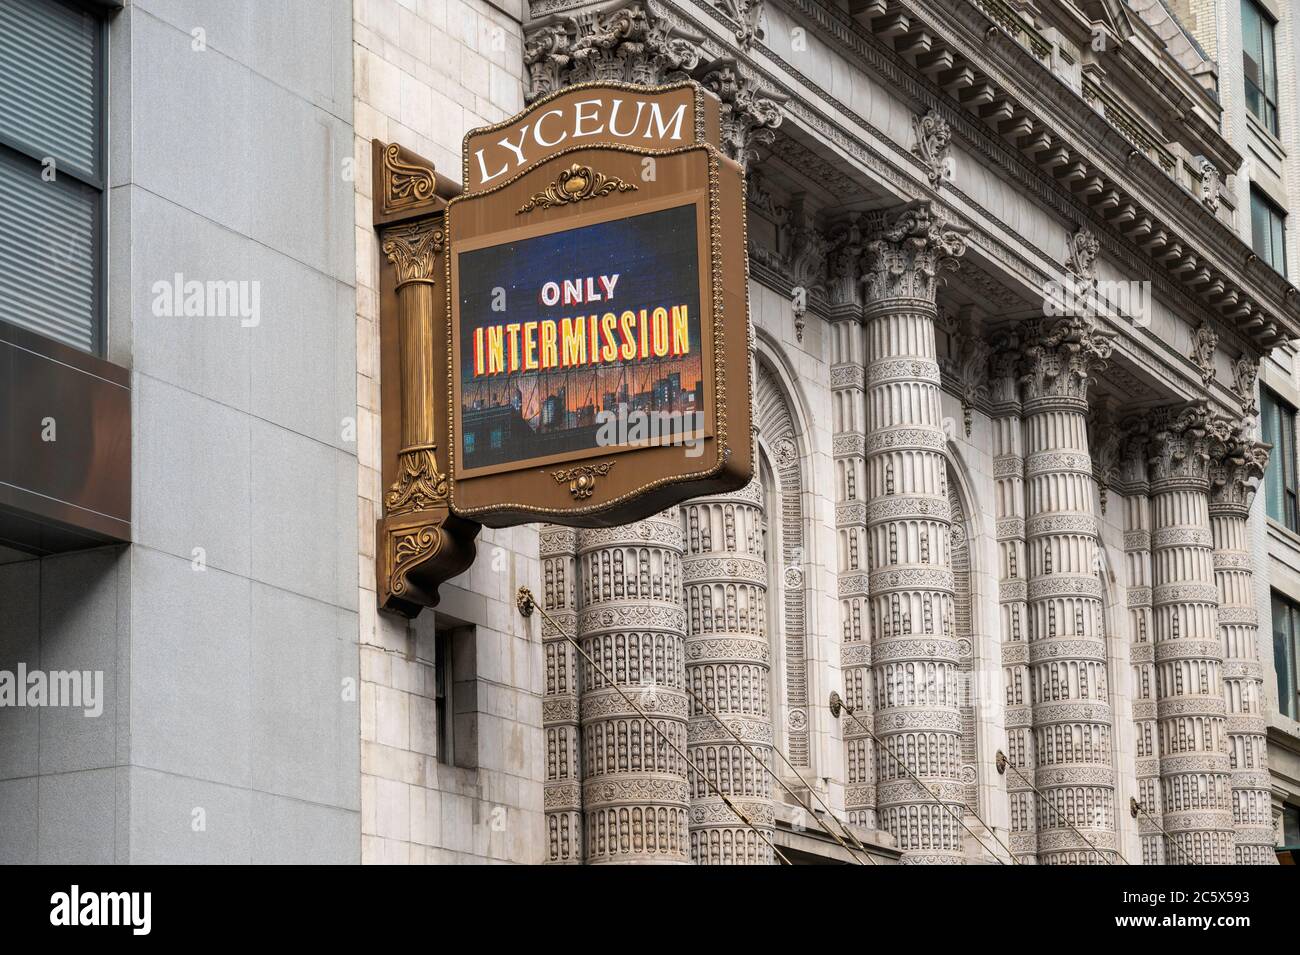 Marquee of the Lyceum Theatre in New York City showing “Only Intermission” during its closing in 2020 due to the Coronavirus pandemic Stock Photo